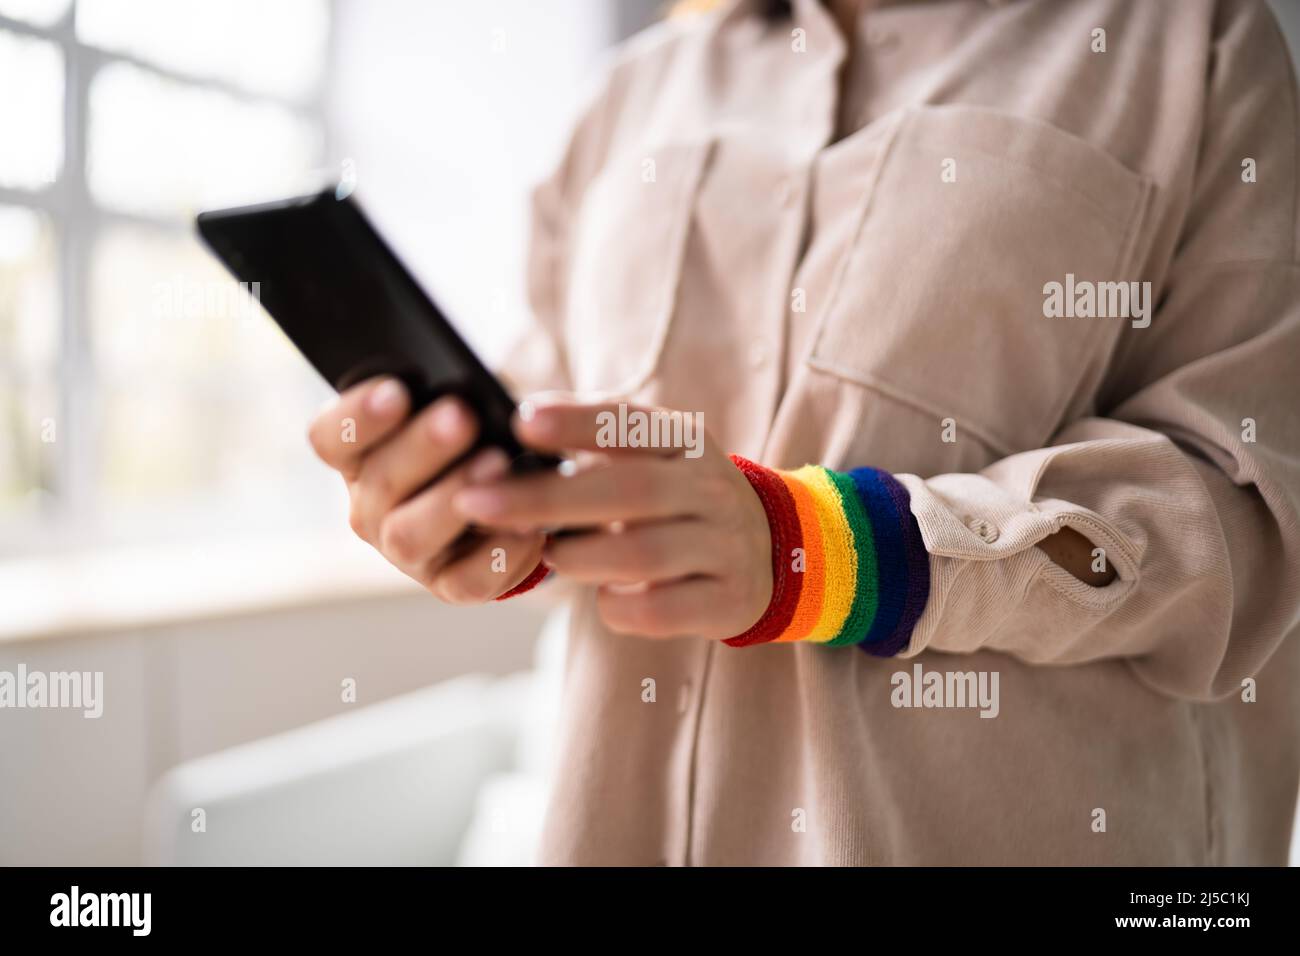 Inclusion And Diversity. LGBT Rainbow Armband. Workplace Equality Stock Photo